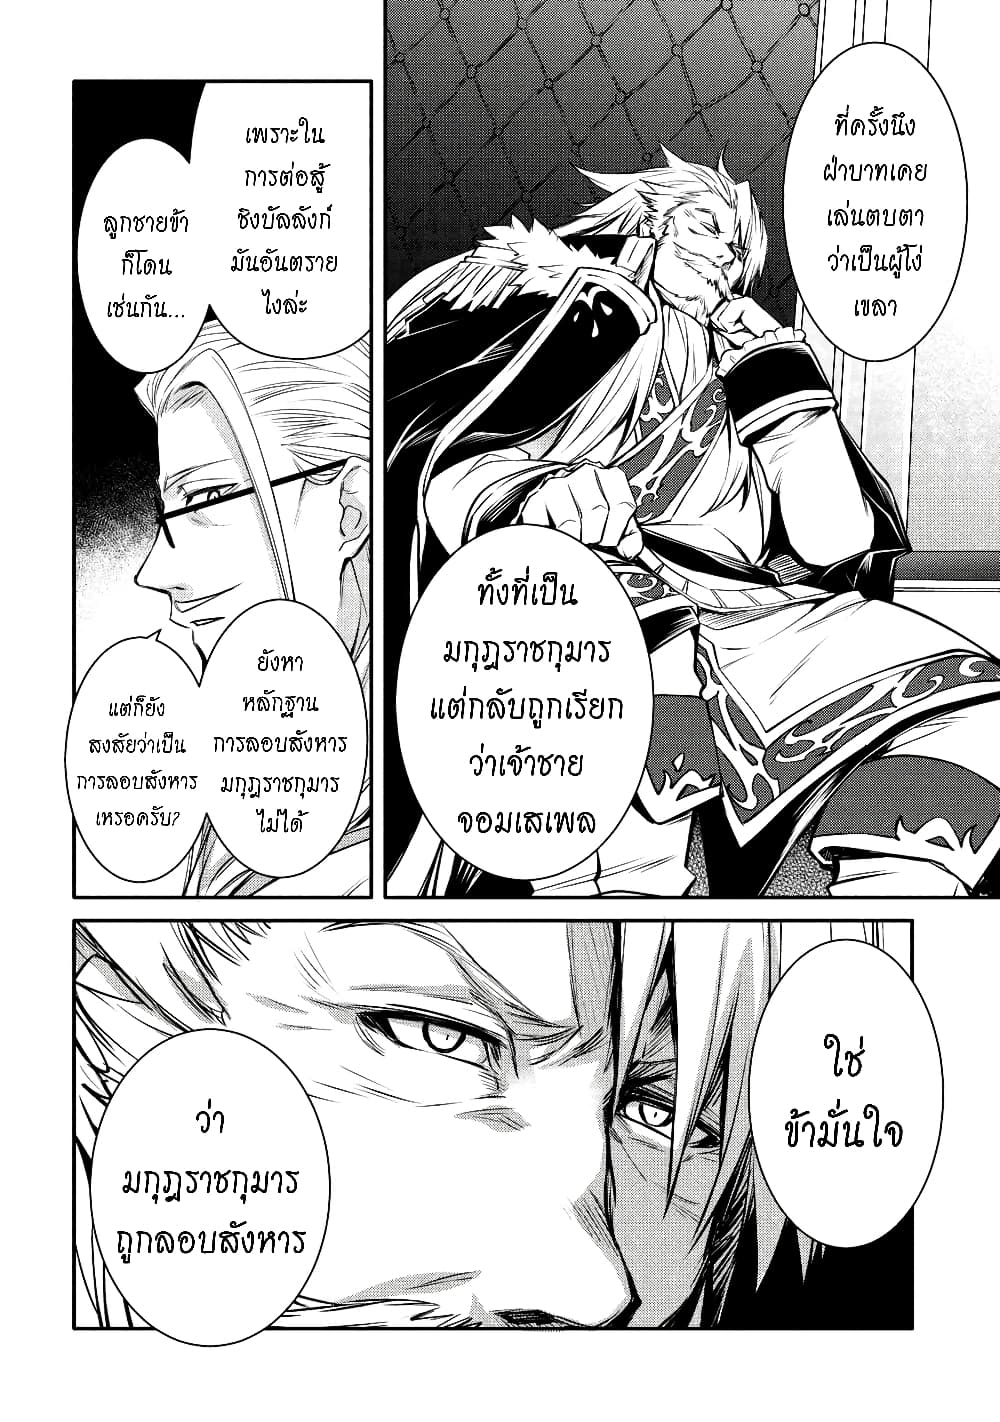 The Strongest Dull Princeรขโฌโขs Secret Battle for the Throne 20. 1 (9)